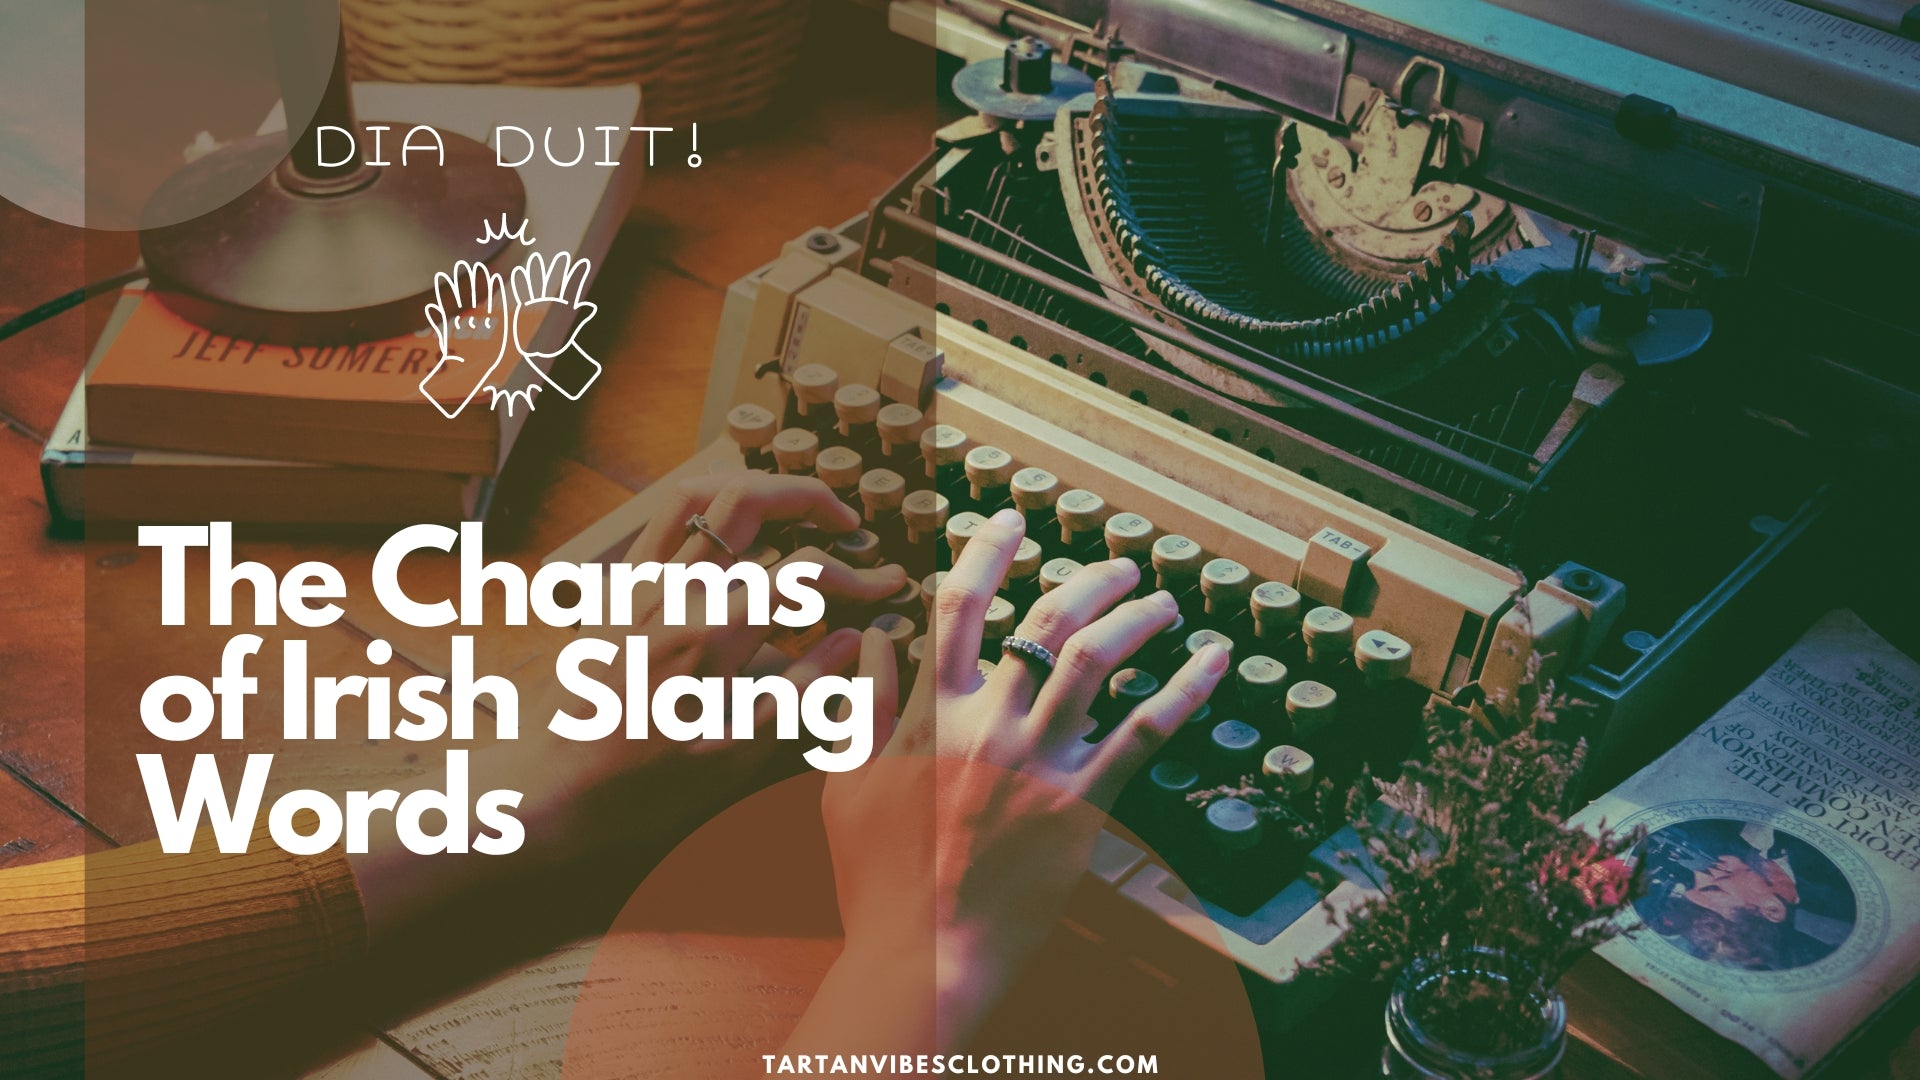 The Charms of Irish Slang Words: A Linguistic Adventure